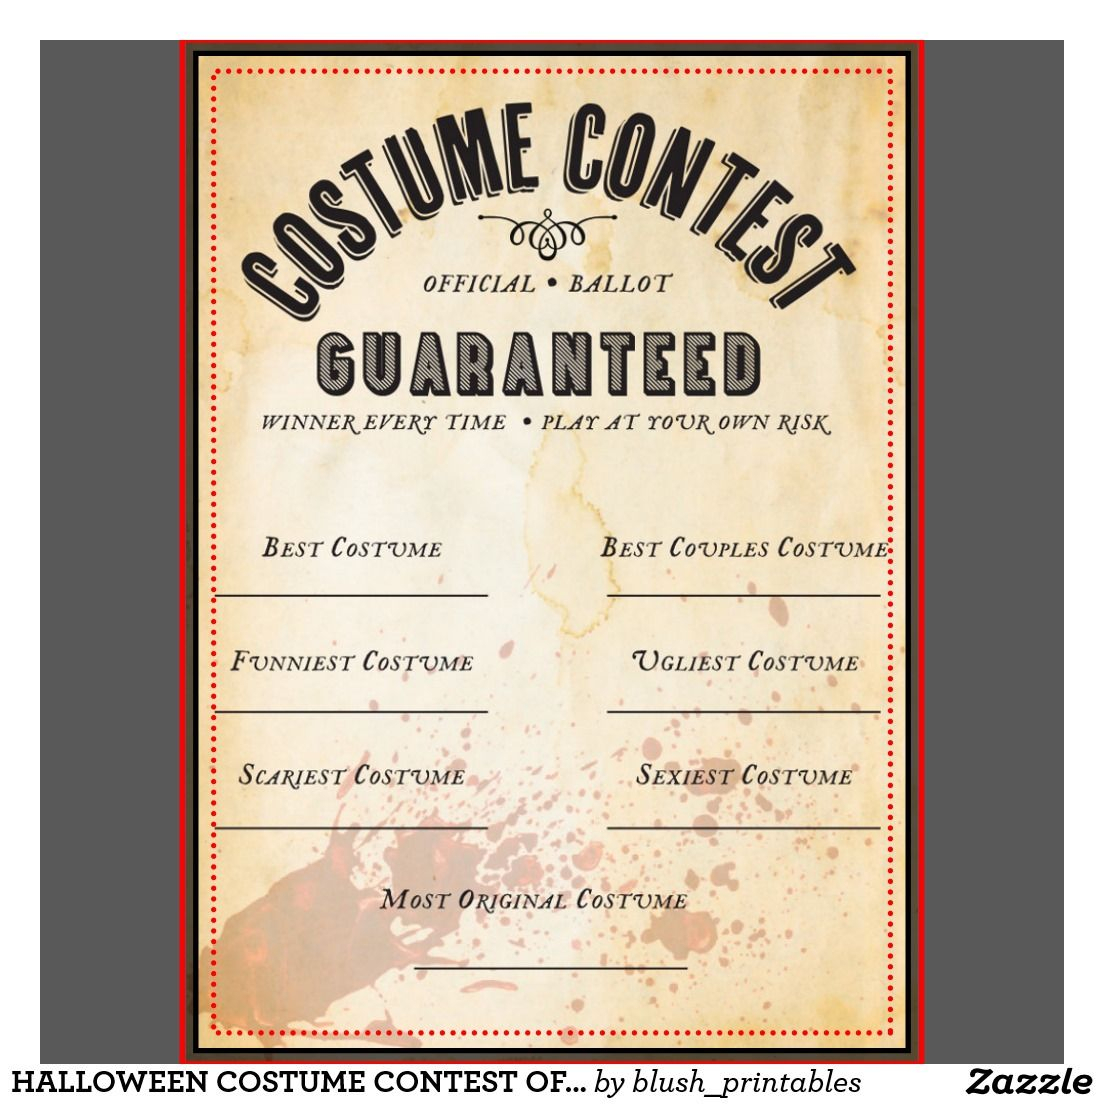 Image Result For Costume Contest Ballot Template | Party Intended For Halloween Costume Certificate Template